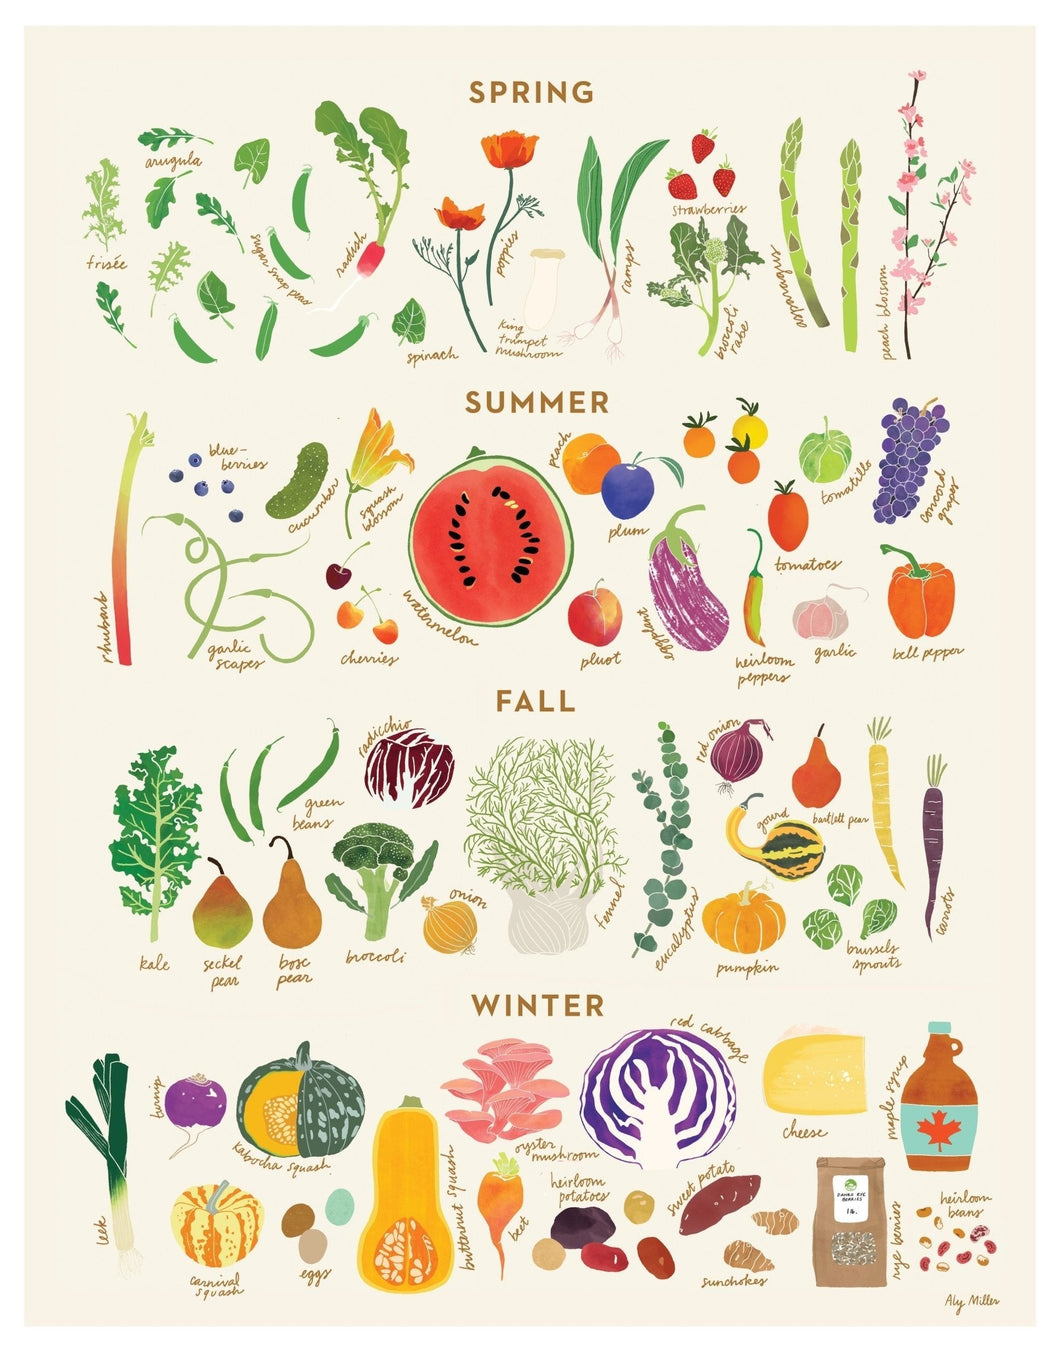 ALY MILLER DESIGNS - Aly Miller Seasonal Guide to Local Produce 8x10